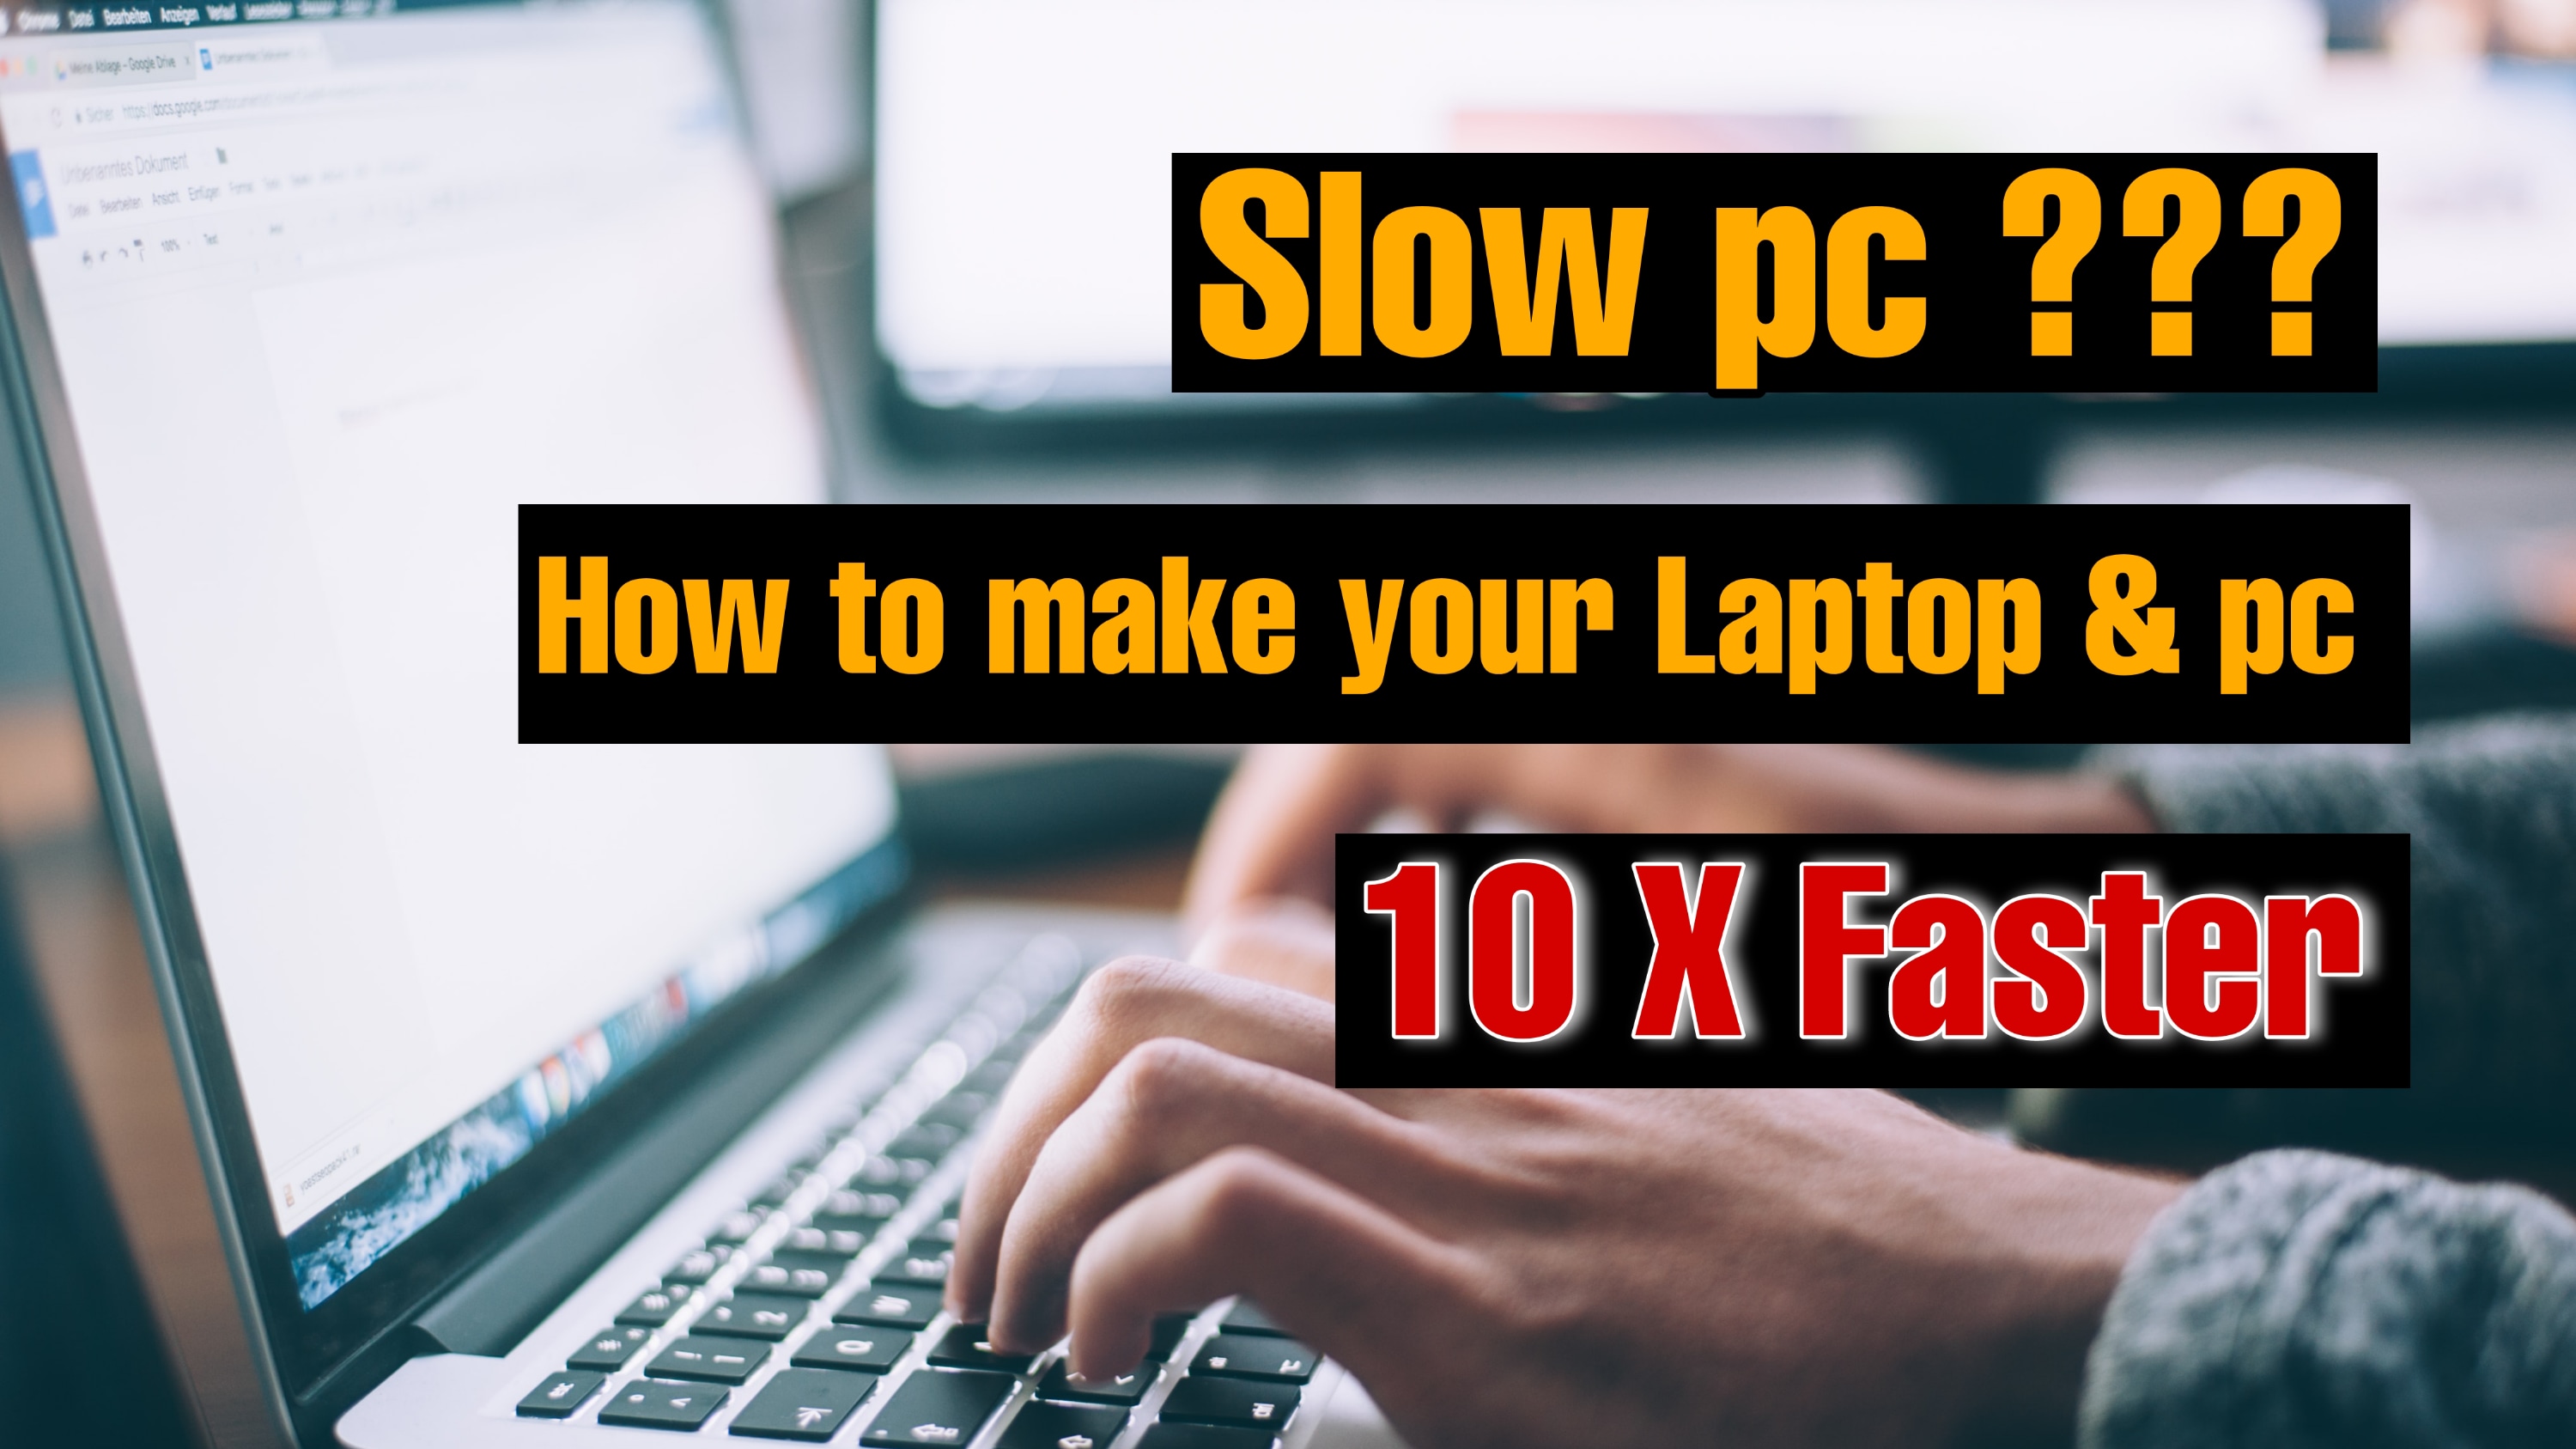 How To Make Your Laptop & pc 10X Faster